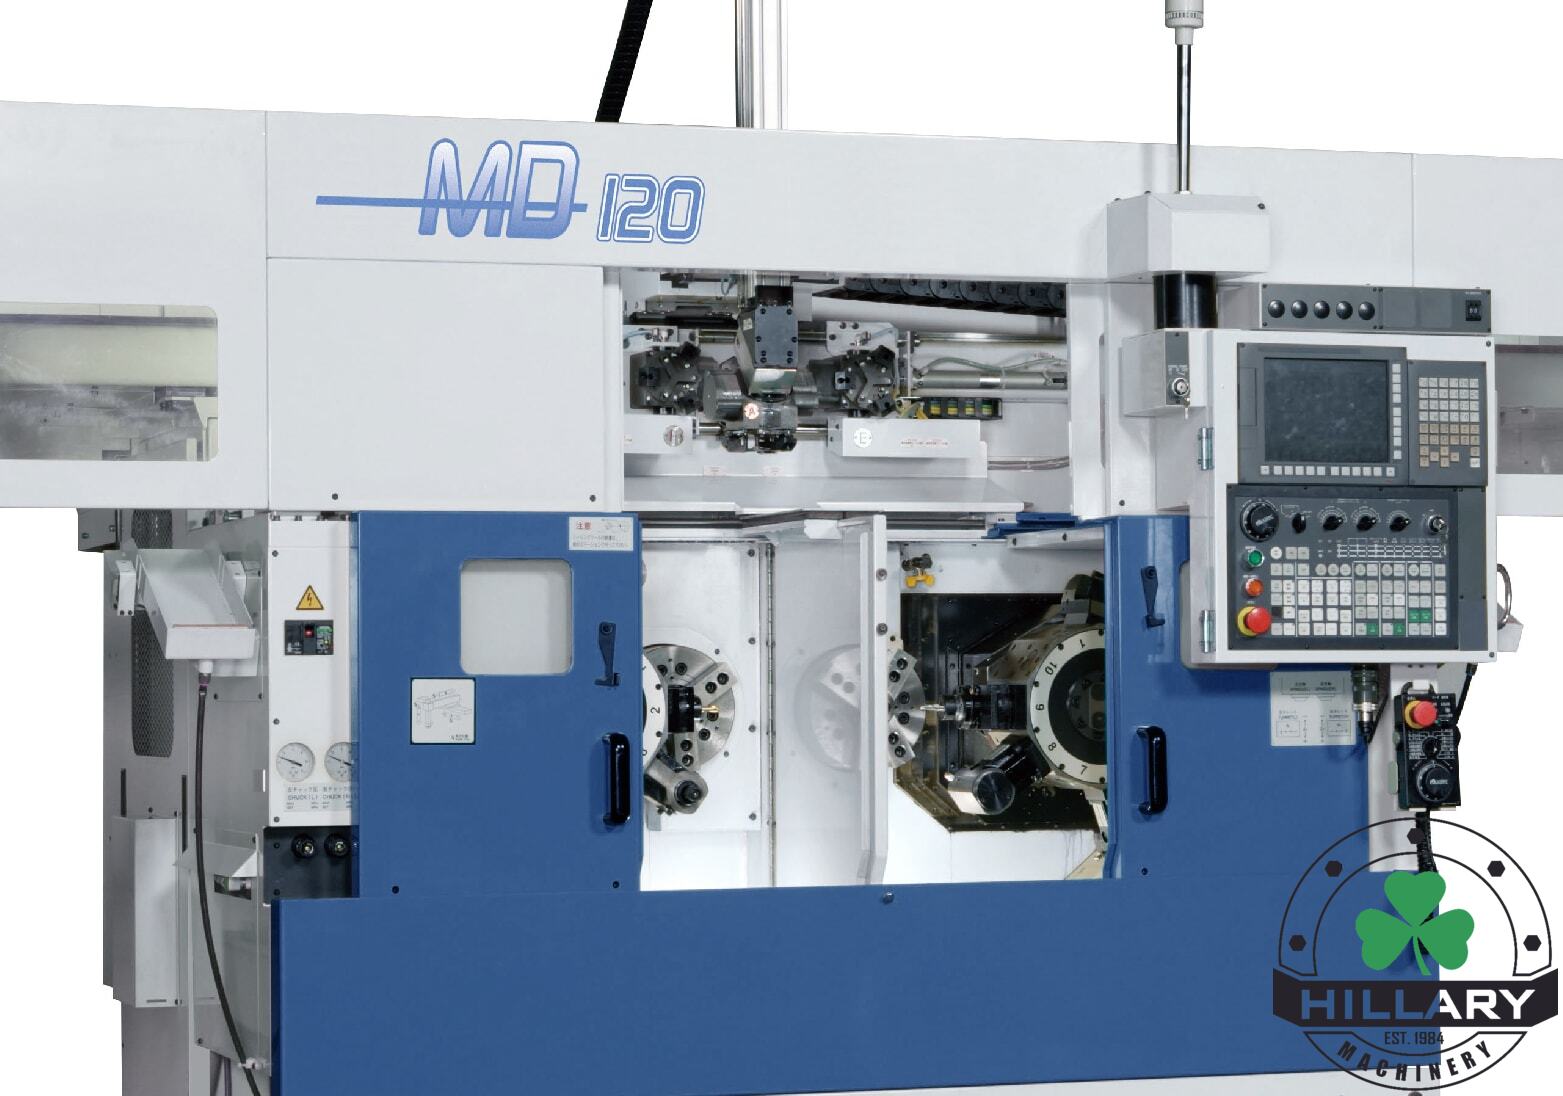 MURATEC MD120 Automated Turning Centers | Hillary Machinery